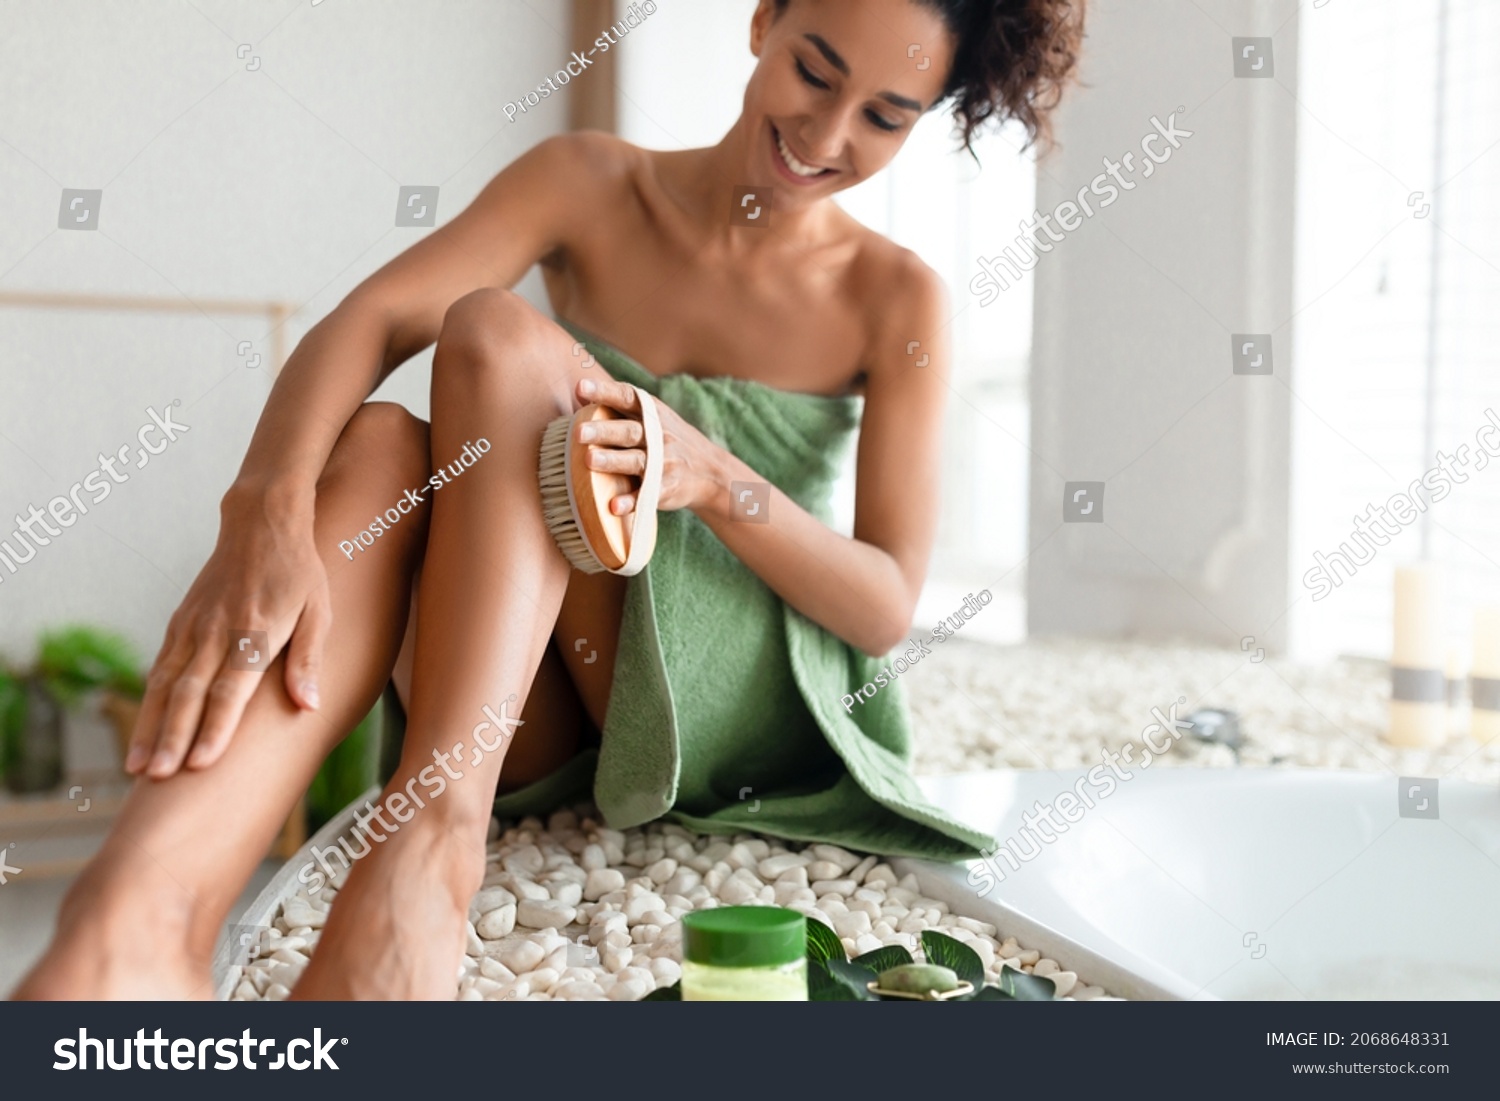 Young woman in towel making anti cellulite or lymphatic drainage massage near foamy bath at home, selective focus. Millennial lady dry brushing her leg, exfoliating skin, pampering herself in bathroom #2068648331